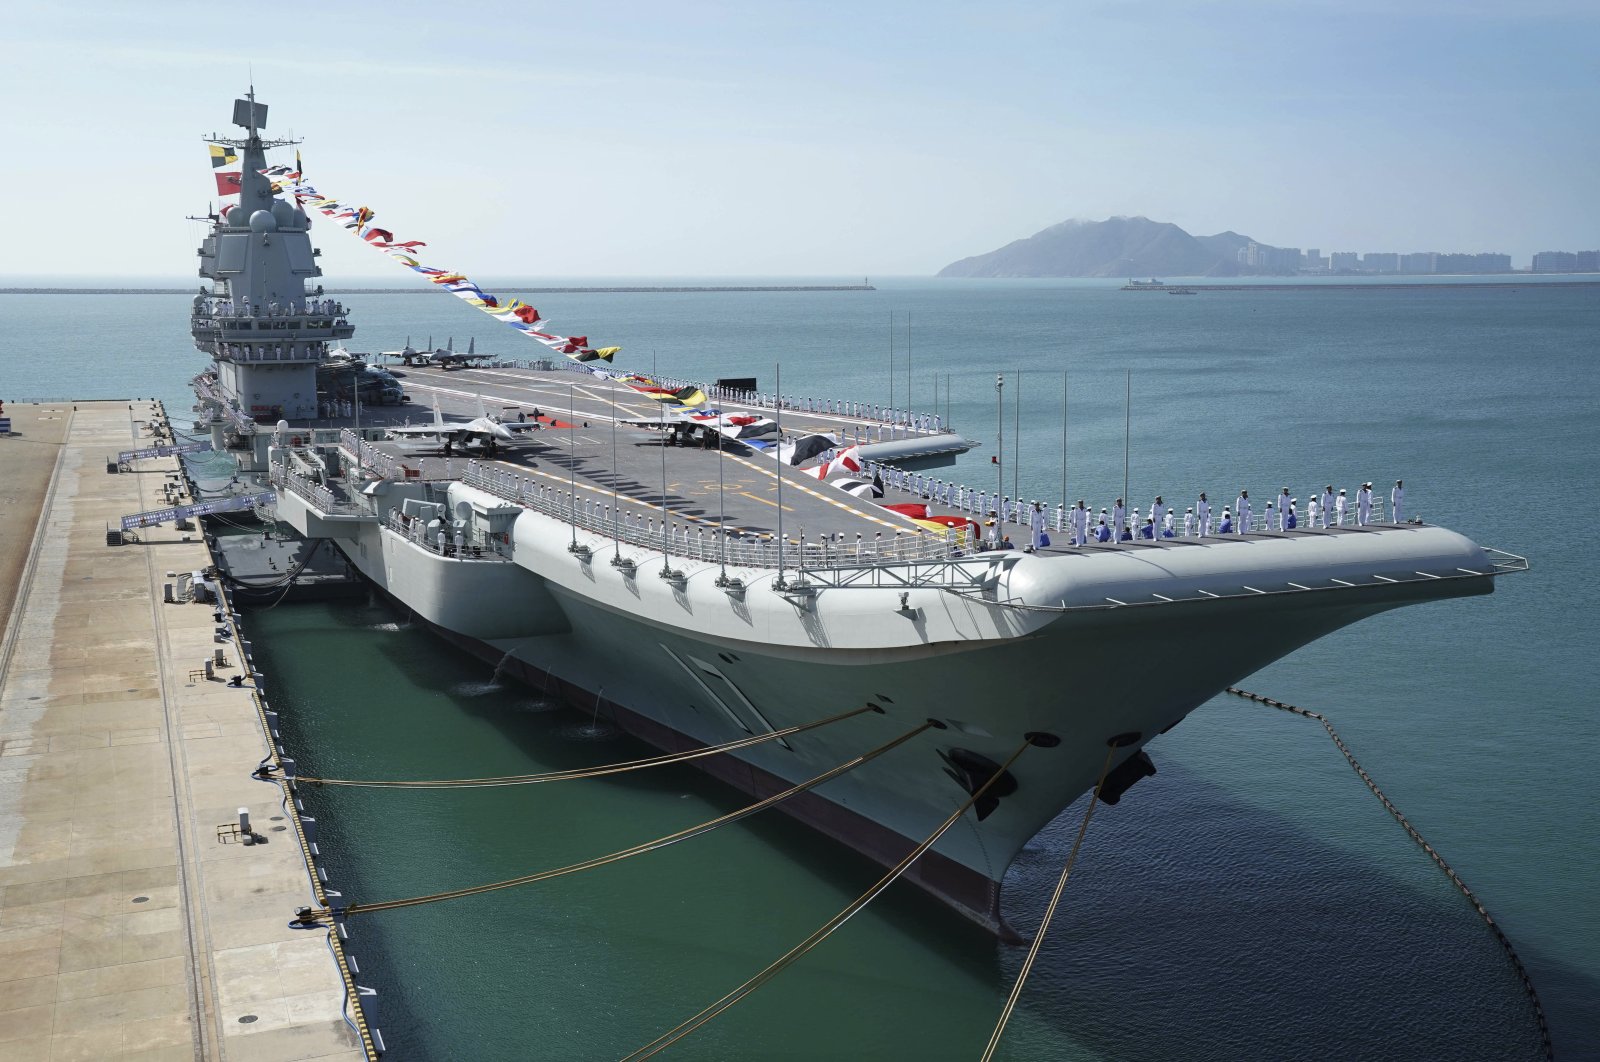 In this Dec. 17, 2019, file photo provided by Xinhua News Agency, the Shandong aircraft carrier is docked at a naval port in Sanya in southern China's Hainan Province. (Xinhua via AP)